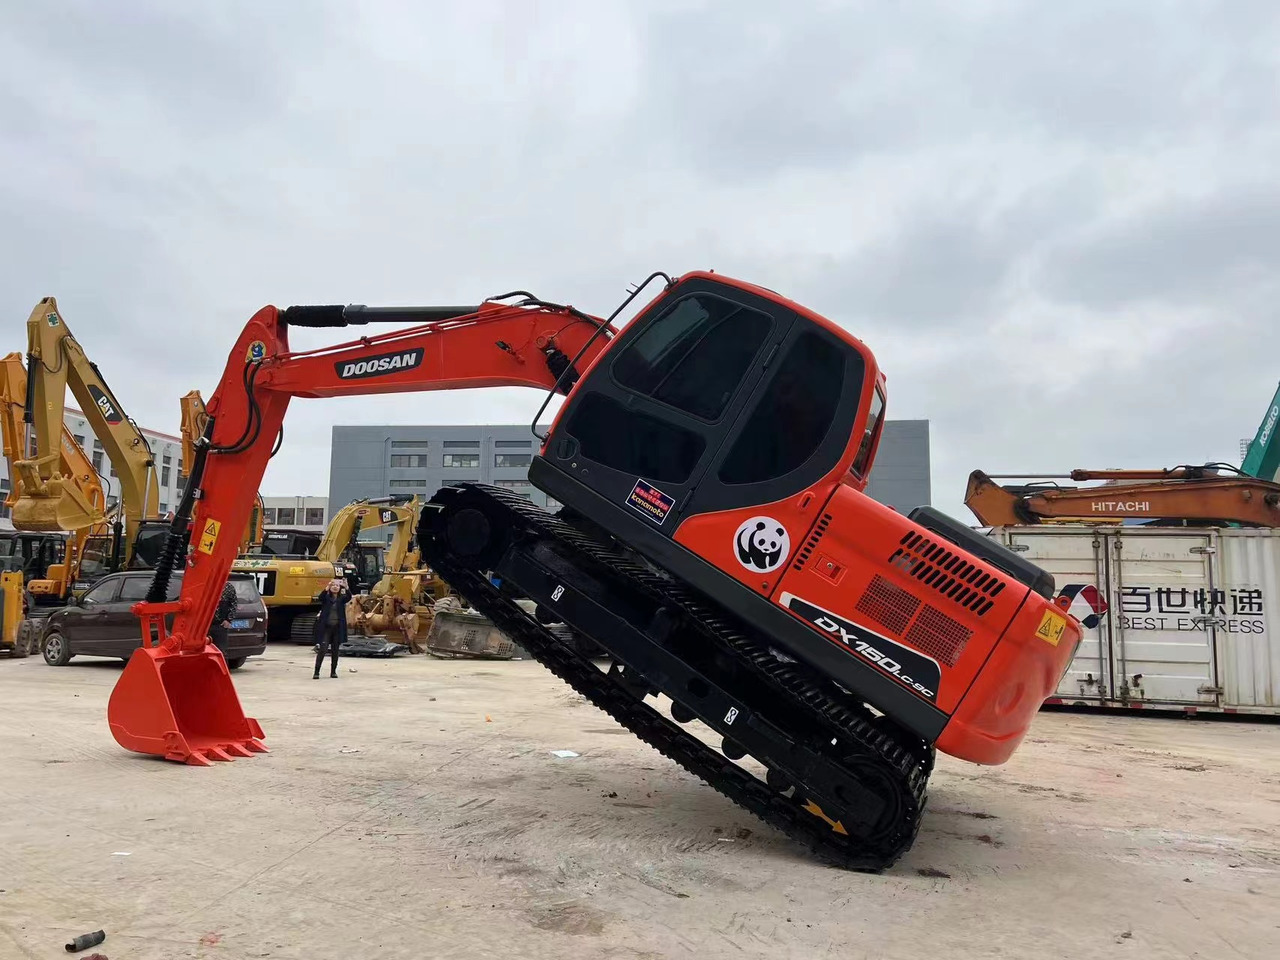 Rupsgraafmachine 2021 made in Korea Good performance High quality used excavator DOOSAN DH150LC-9 good condition in stock on sale: afbeelding 3